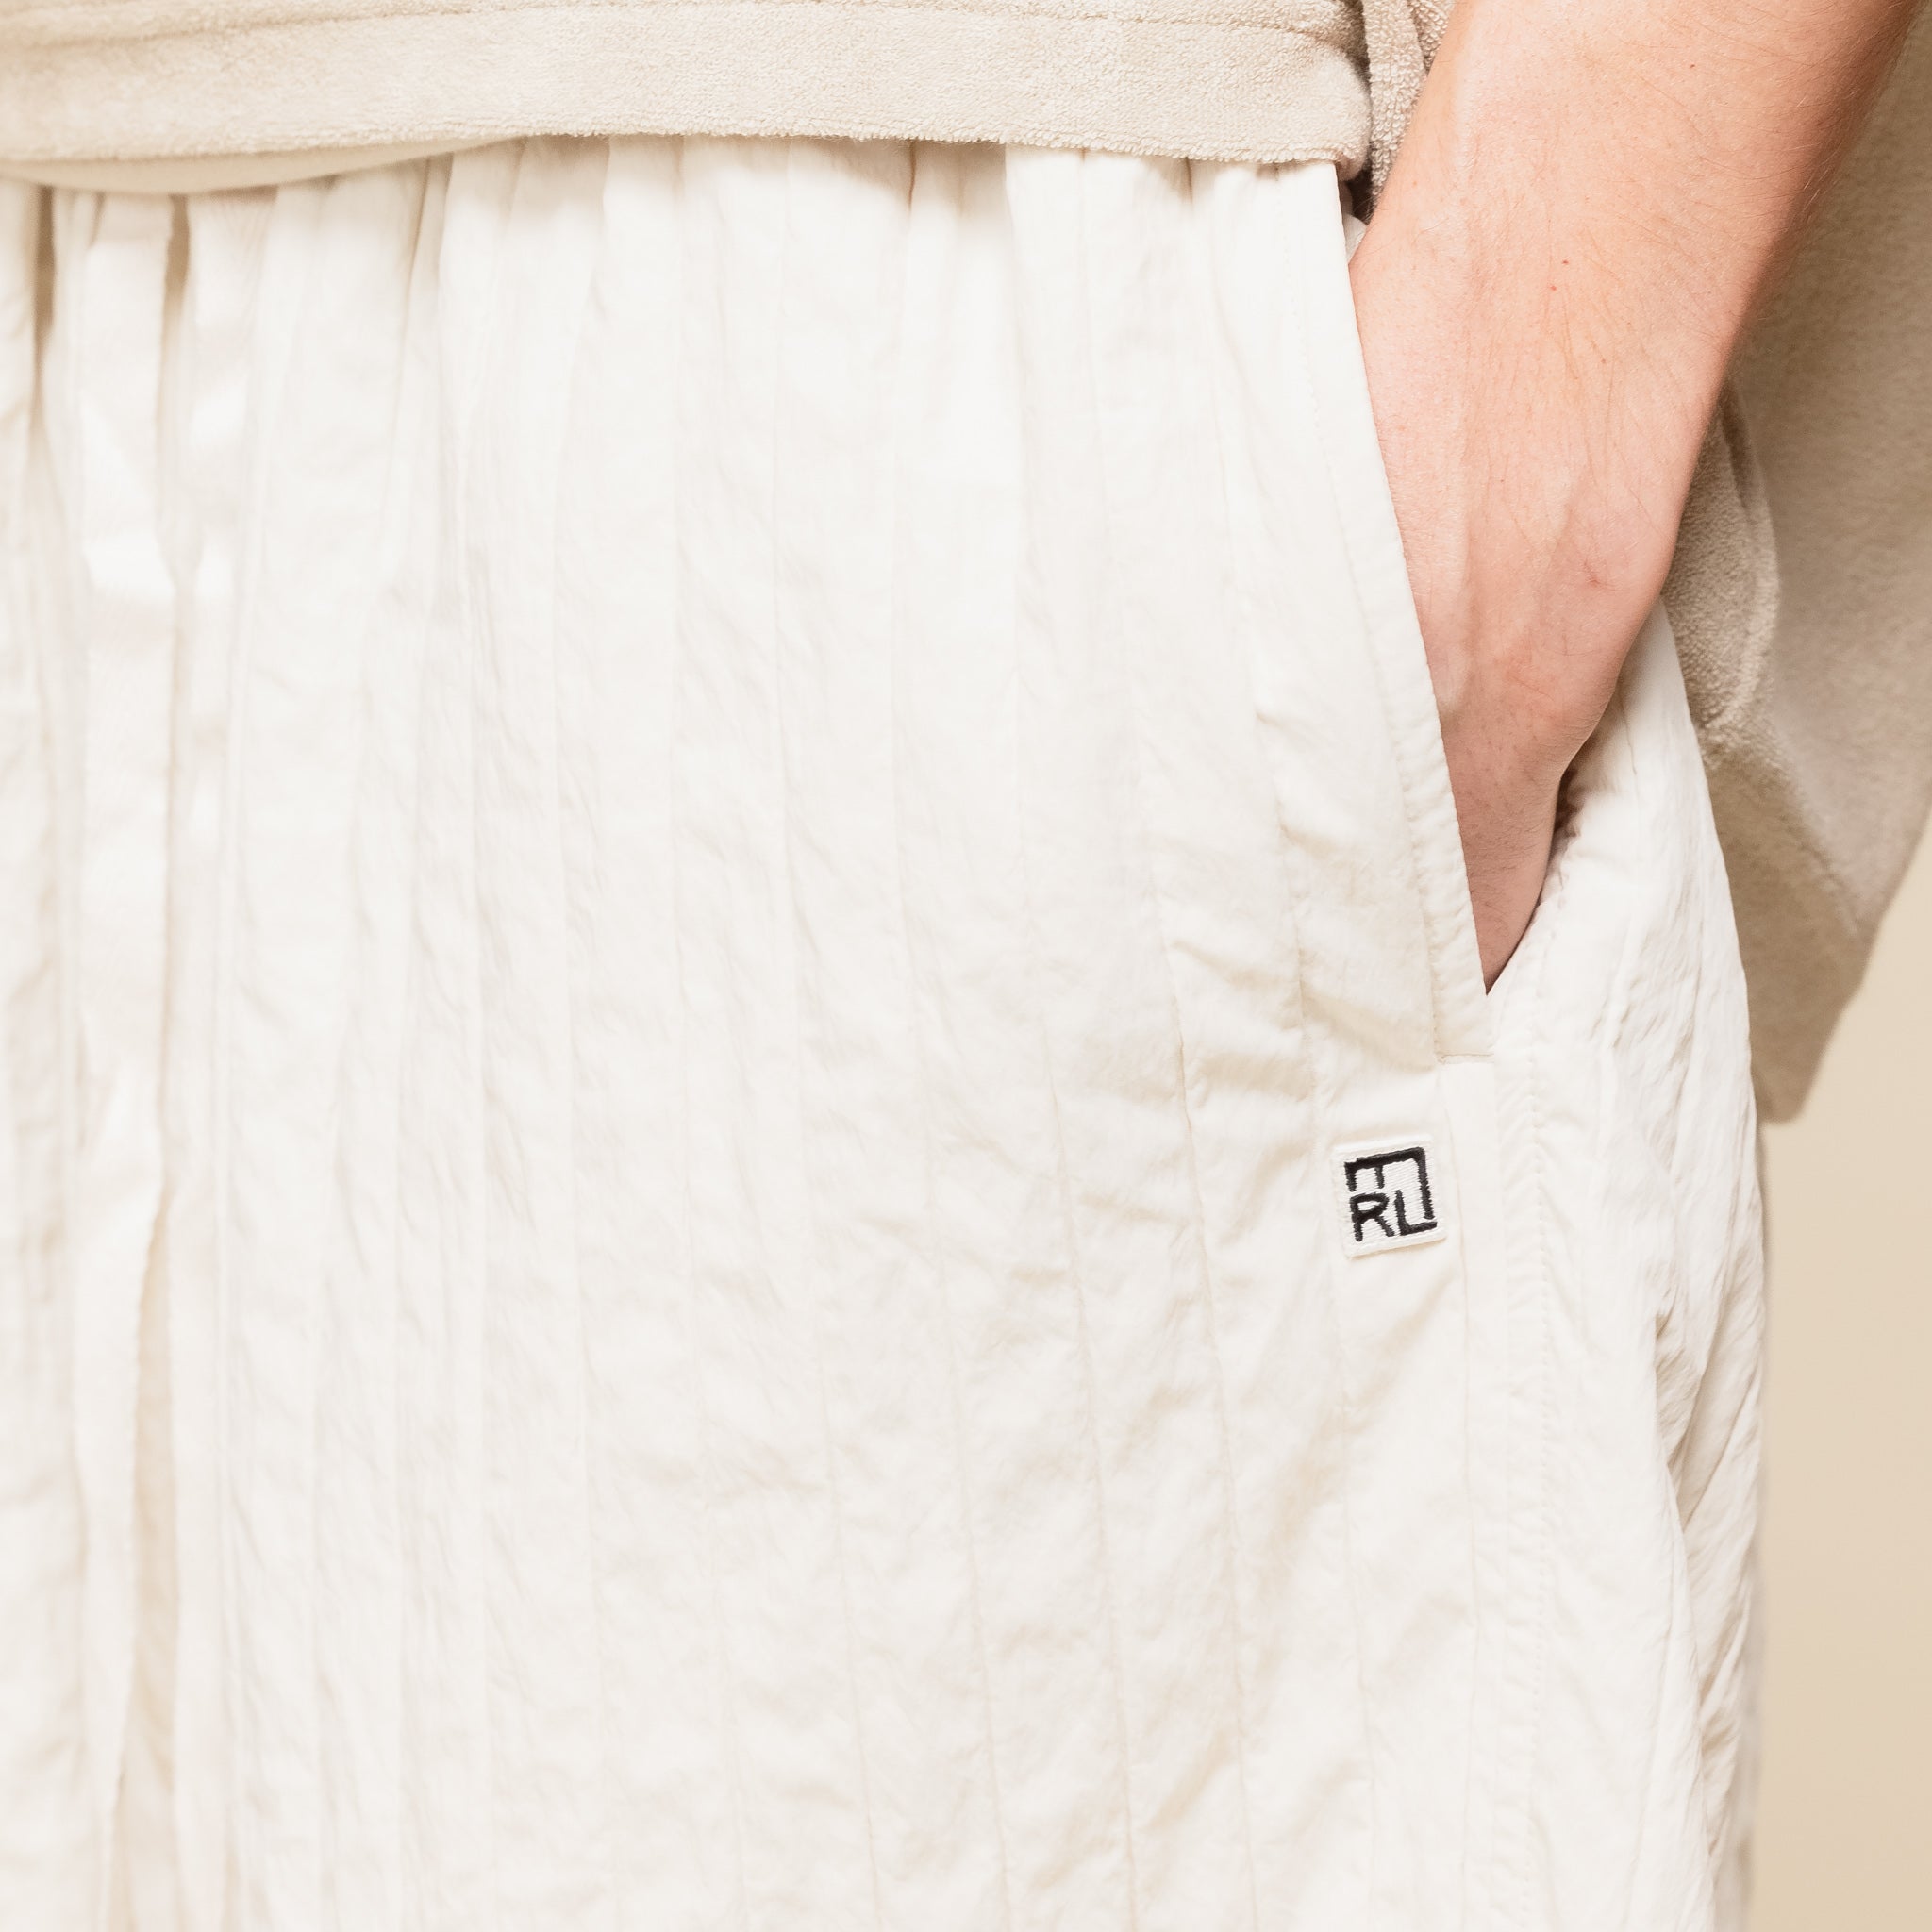 Merely Made - Super Comfy Quilted Pants - Off White "merely made website" "merely made stockist"